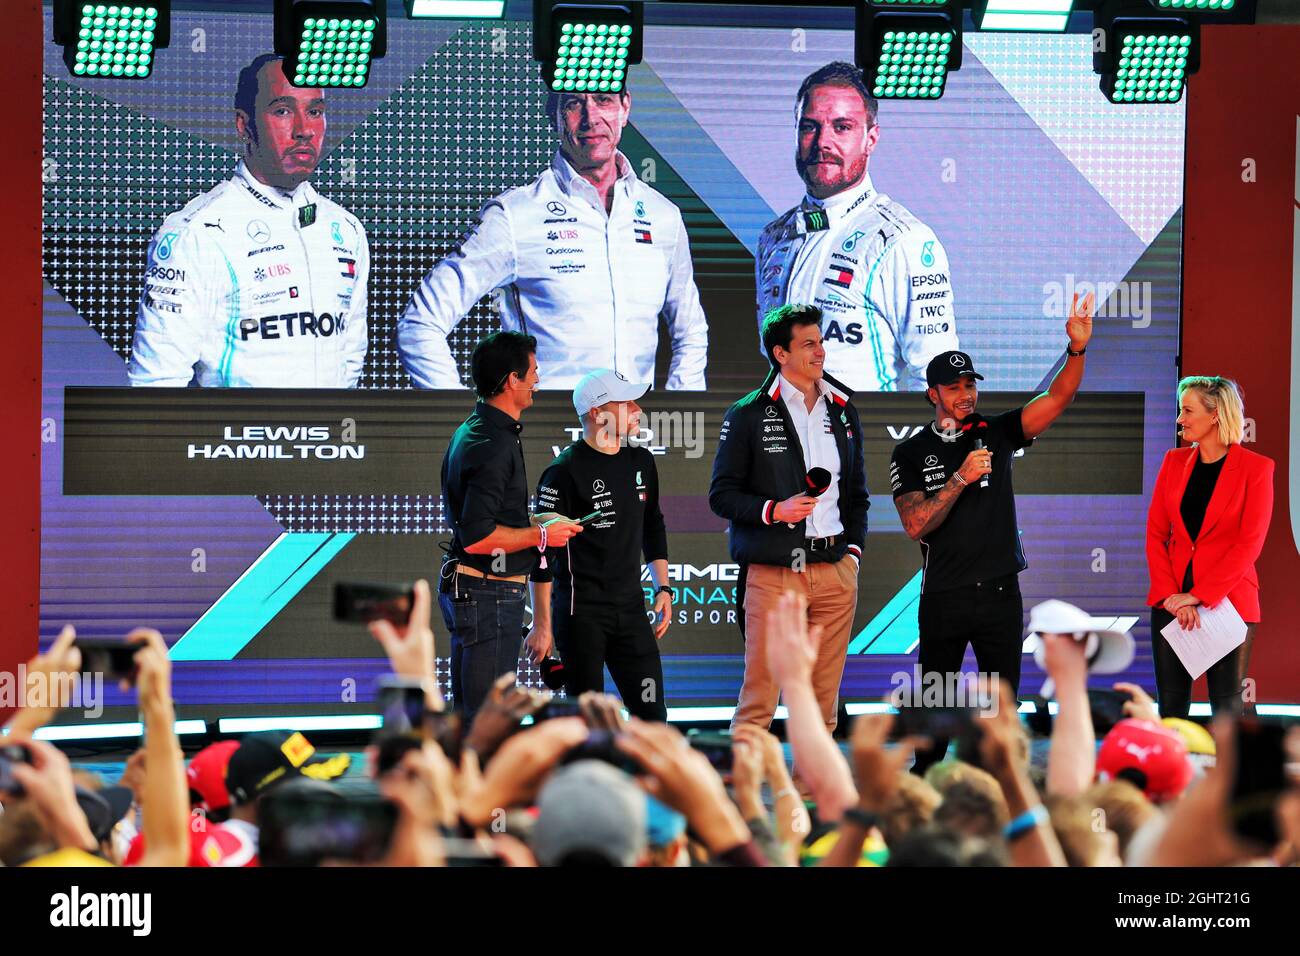 L to R) Mark Webber (AUS) Channel 4 Presenter; Valtteri Bottas (FIN) Mercedes AMG F1; Toto Wolff (GER) Mercedes AMG F1 Shareholder and Executive Director; and Lewis Hamilton (GBR) Mercedes AMG F1,